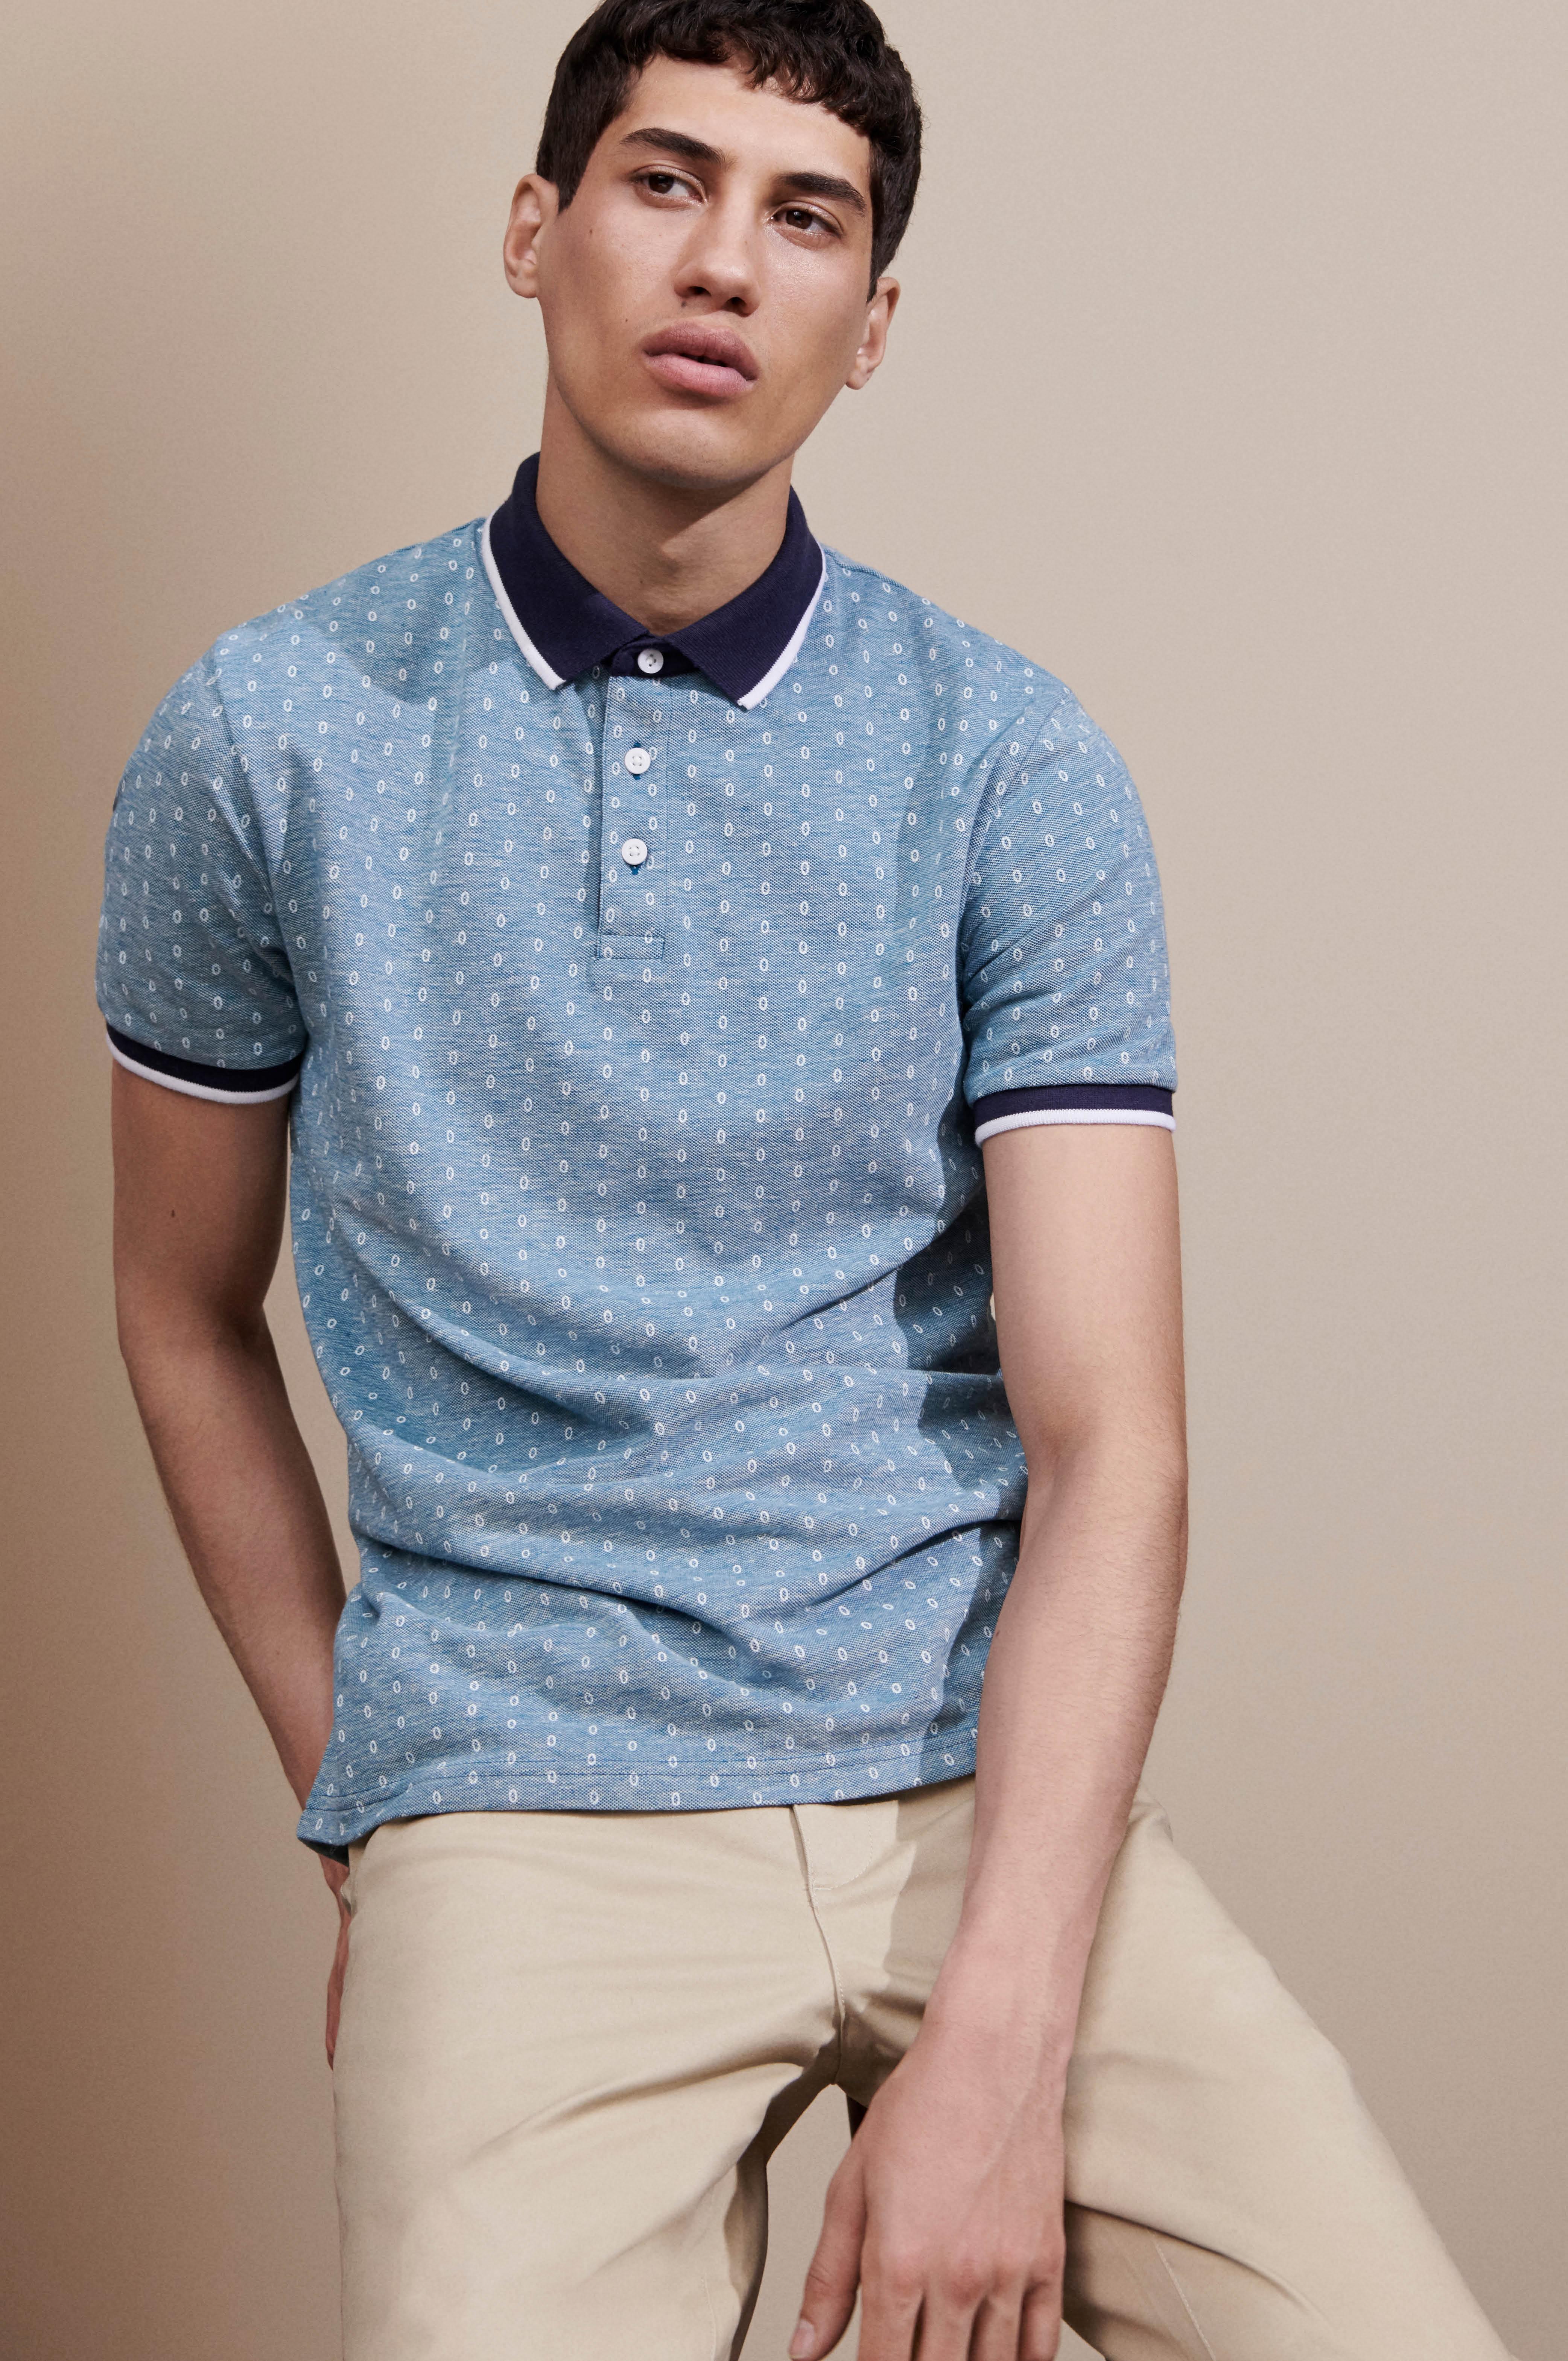 Male in polo top